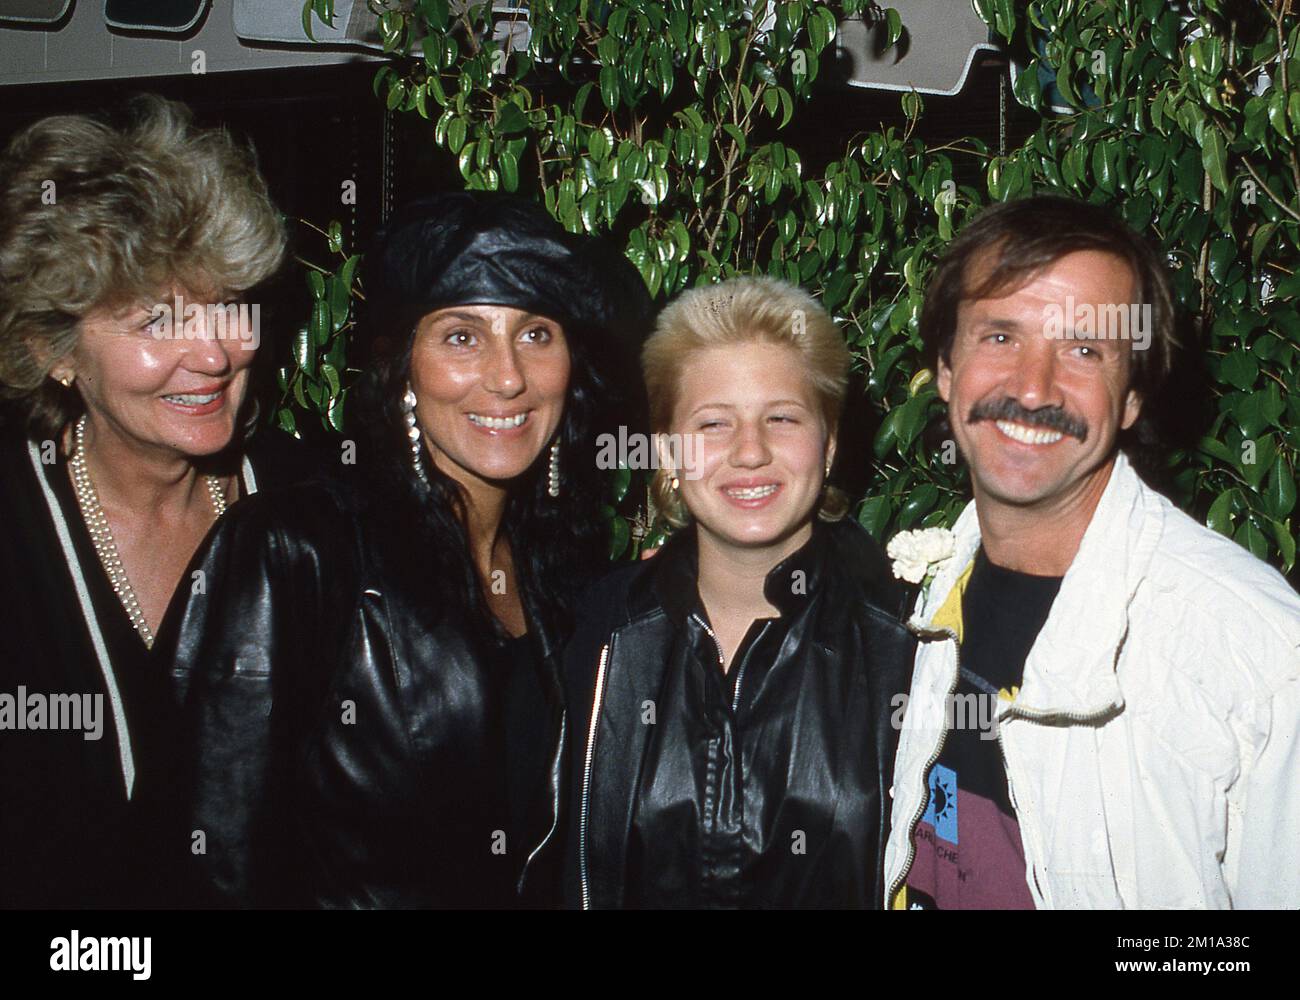 **FILE PHOTO** Georgia Holt, Mother of Cher, Has Passed Away. Cher, Mother, Georgia Holt, Chastity Bono, Sonny Bono on April 1983 Credit: Ralph Dominguez/MediaPunch Stock Photo